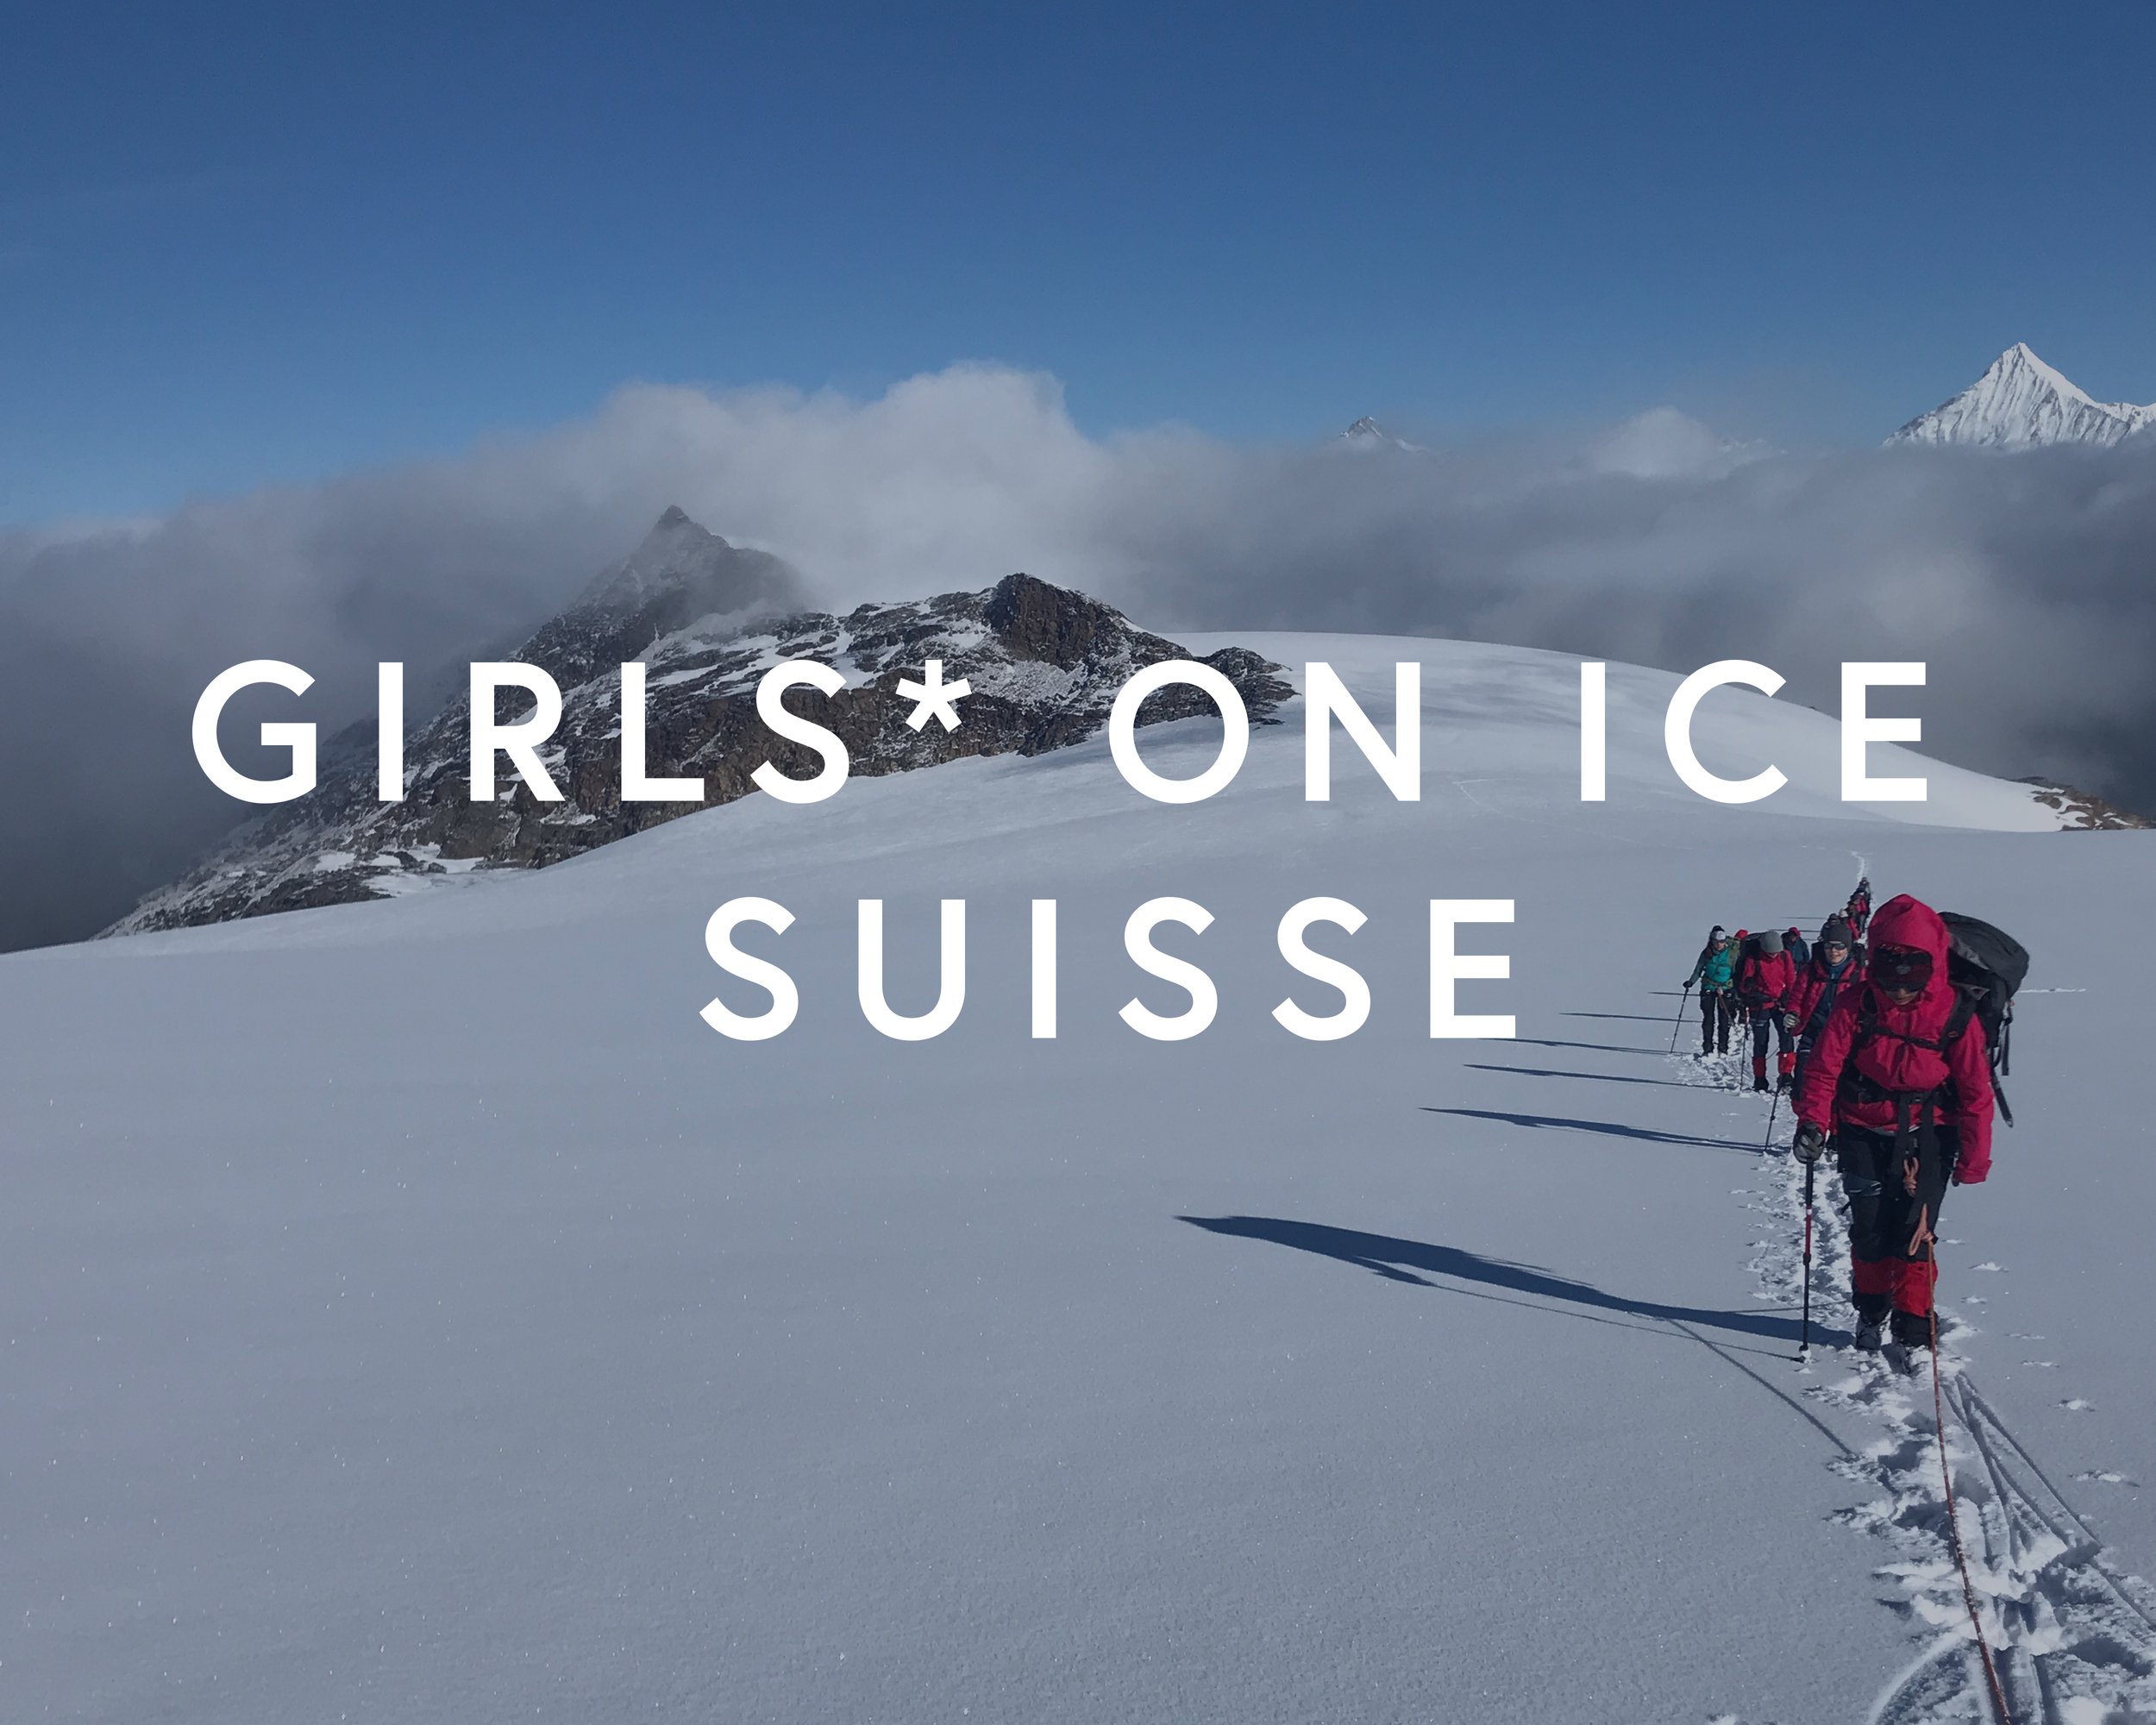 Image links to the Girls* on ice suisse expedition info page